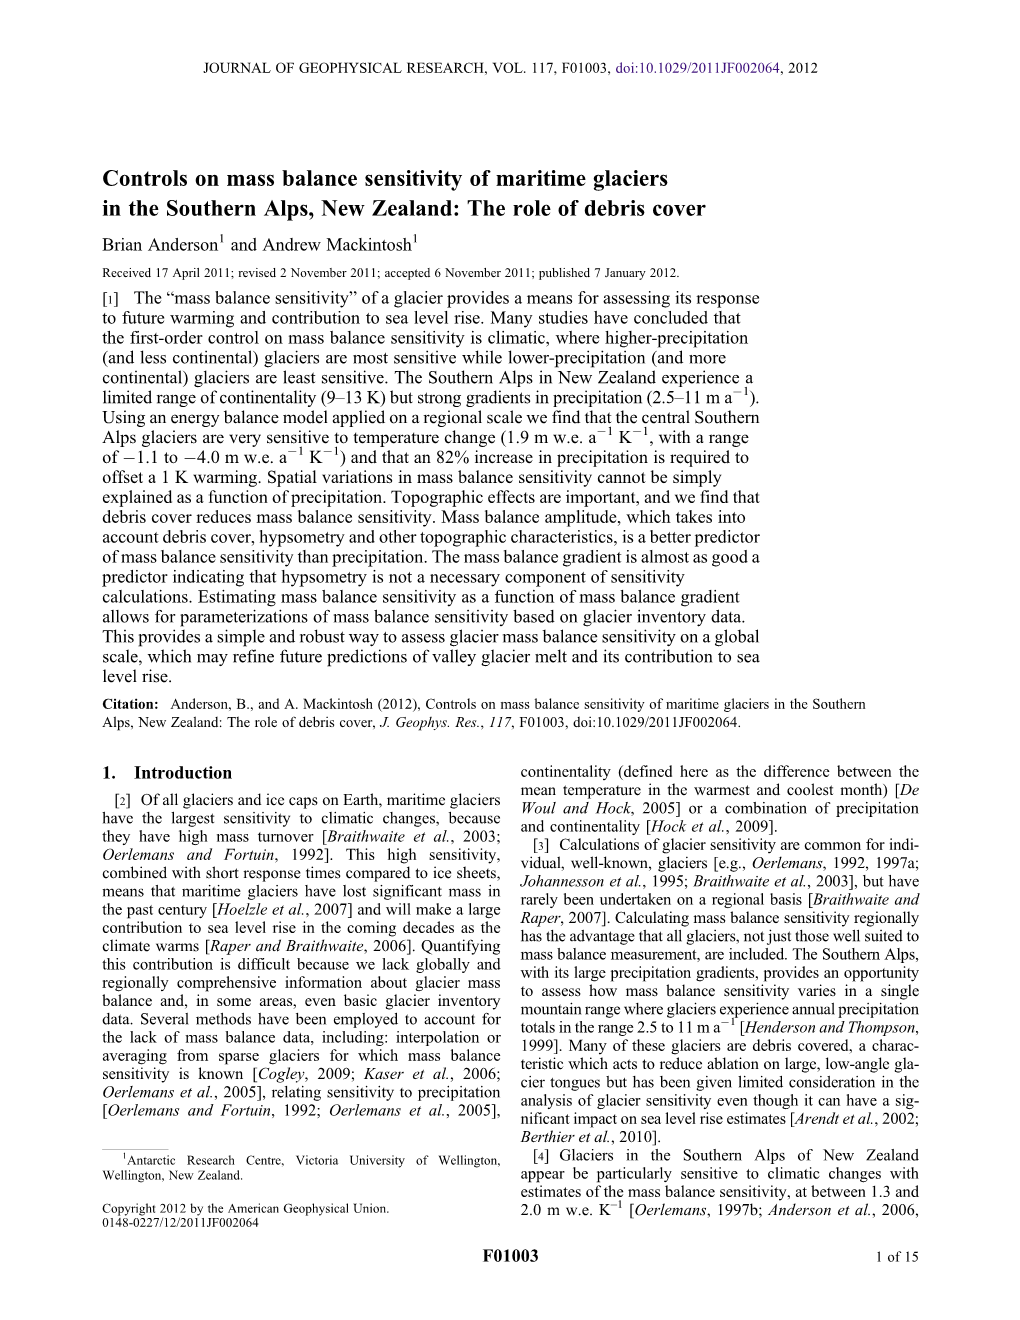 Controls on Mass Balance Sensitivity of Maritime Glaciers in the Southern